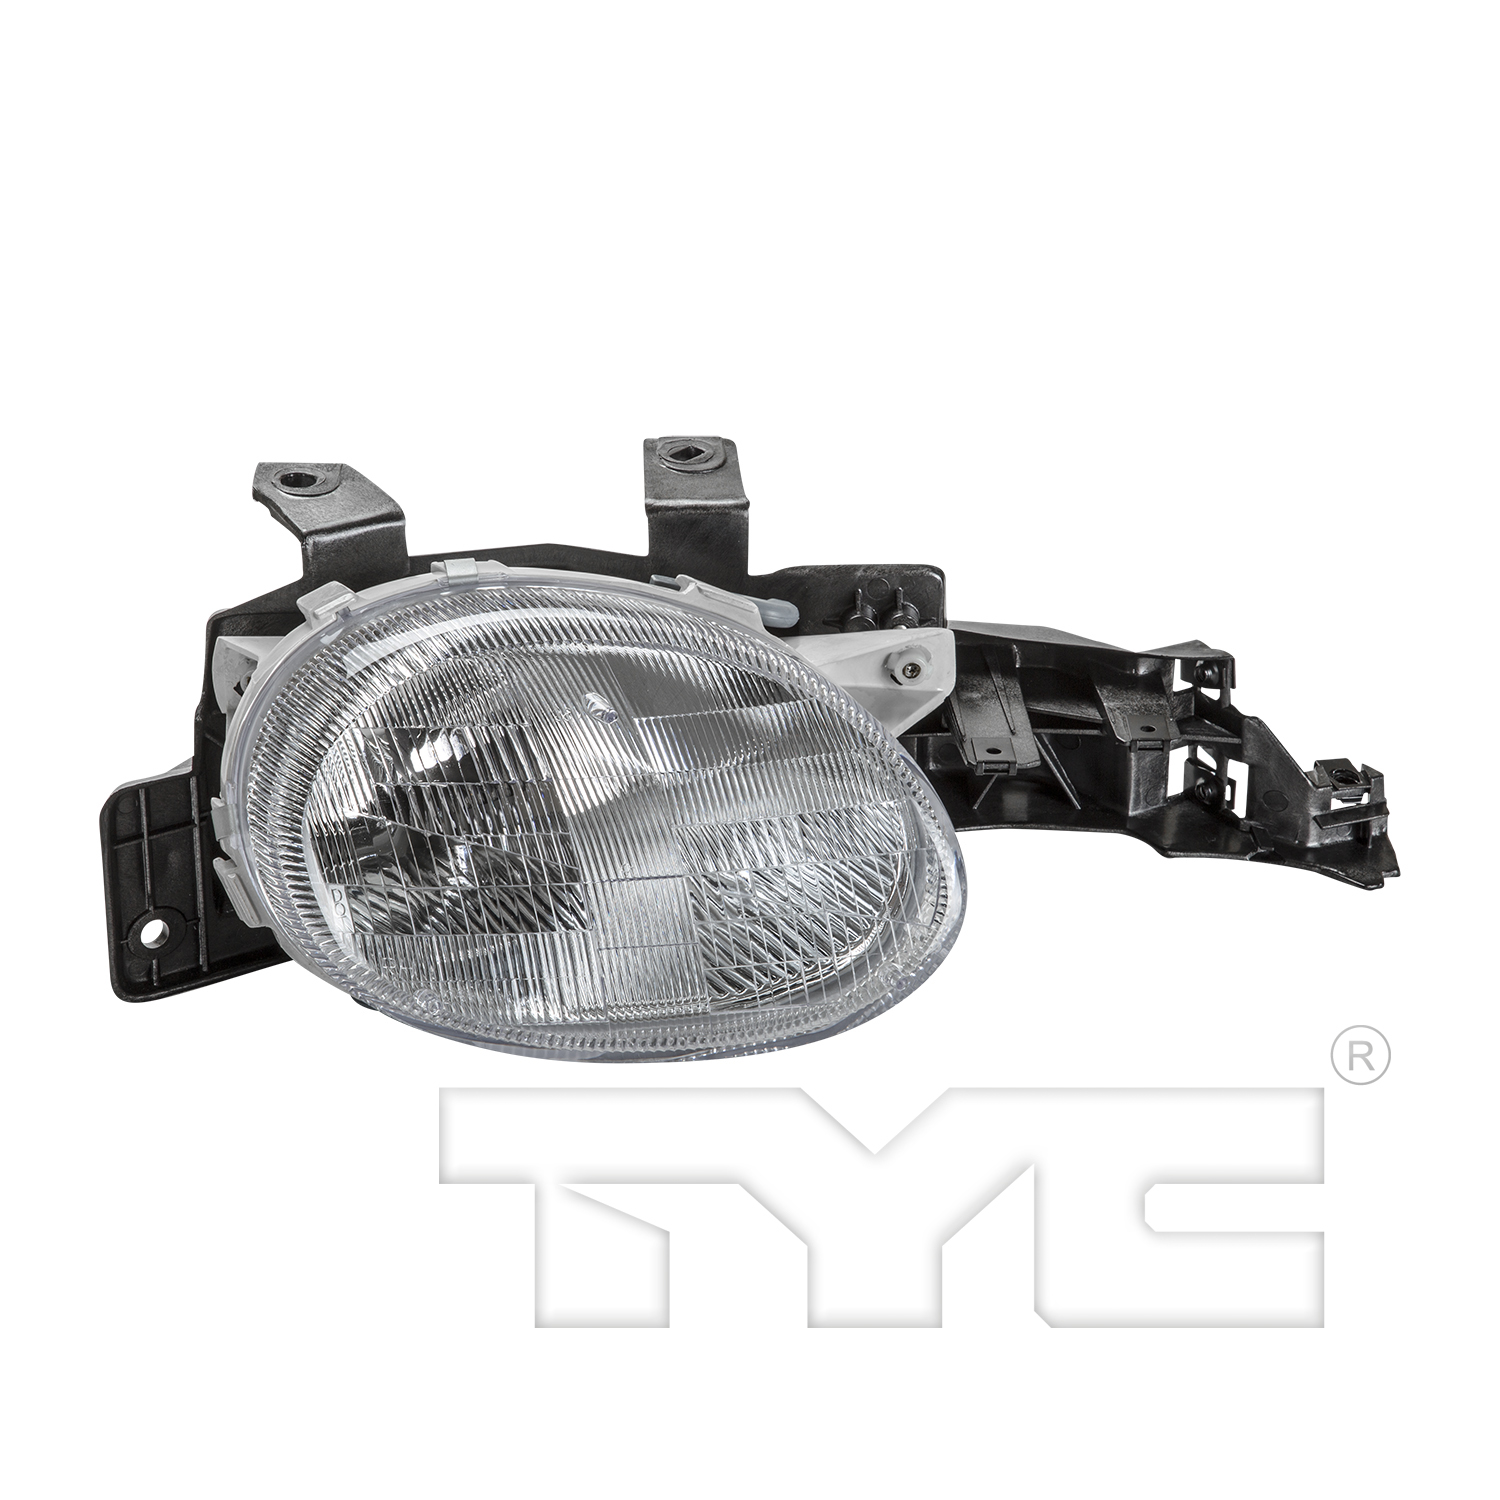 Aftermarket HEADLIGHTS for PLYMOUTH - NEON, NEON,95-99,RT Headlamp assy composite